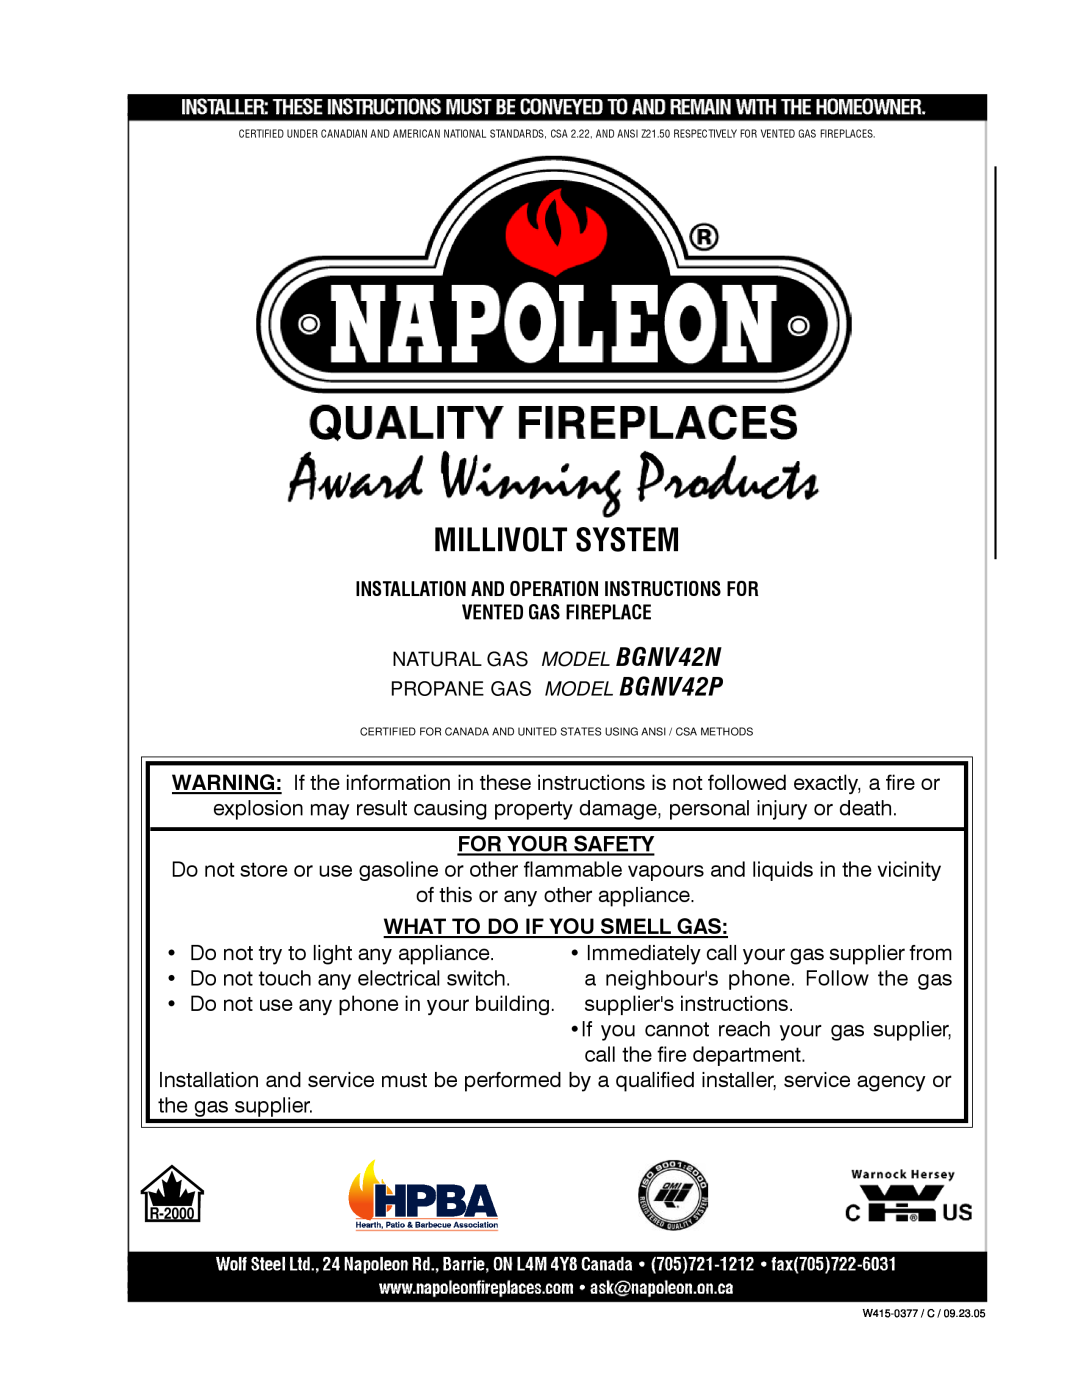 Napoleon Fireplaces BGNV42P, BGNV42N manual Millivolt System, For Your Safety, What To Do If You Smell Gas 